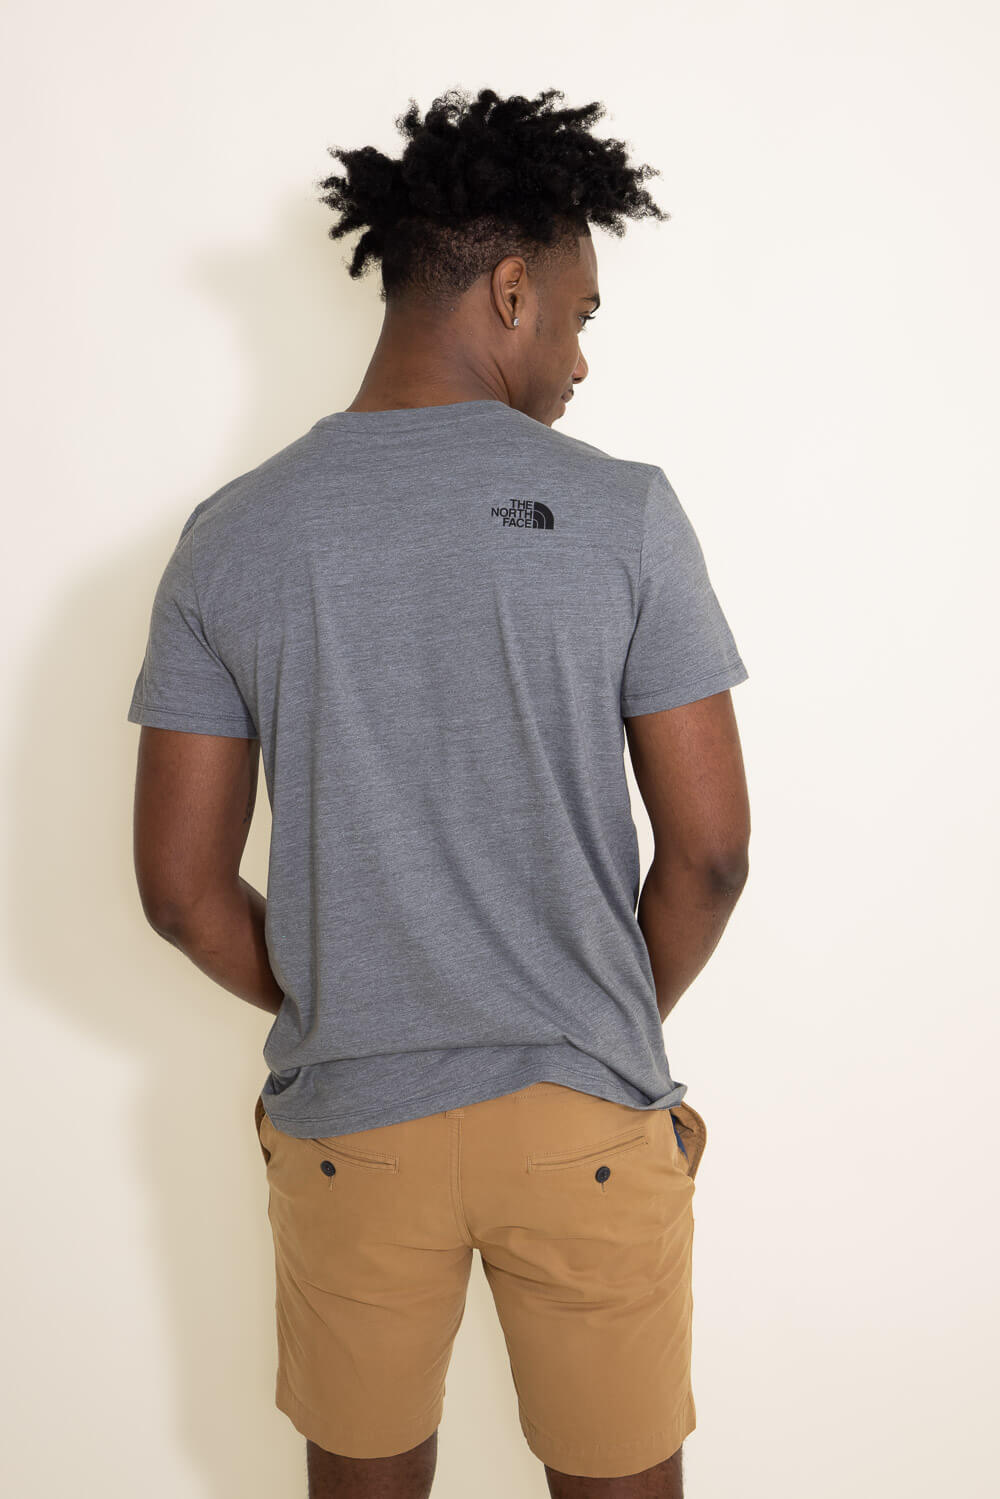 The North Face Tri Blend Bear T-Shirt for Men in Grey Heather | NF0A81 –  Glik's